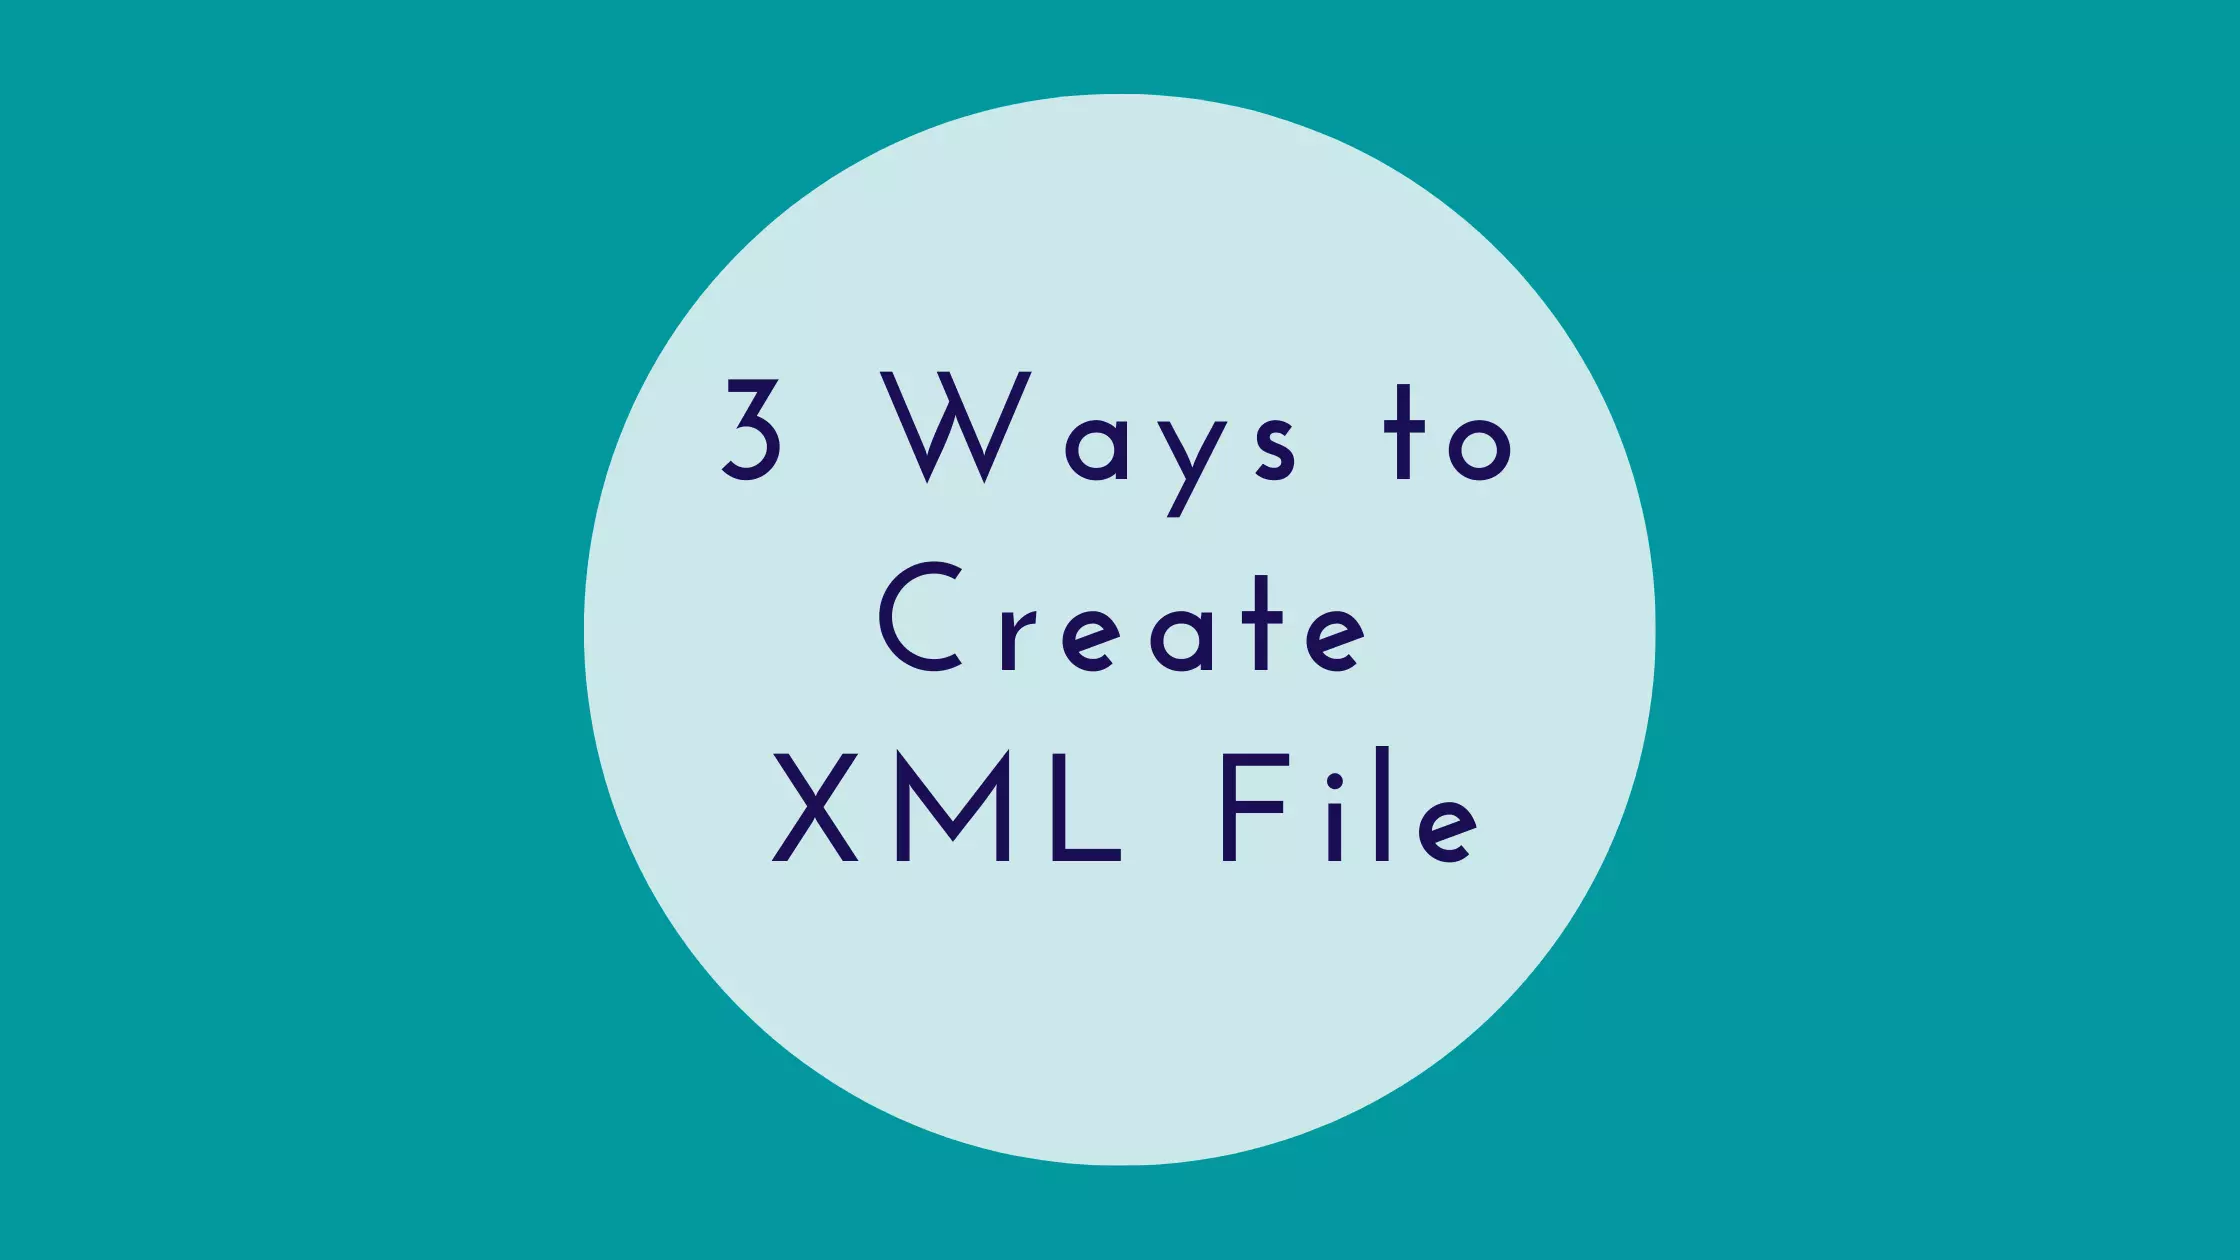 How To Create Xml File In A Few Simple Steps For Beginners 0166